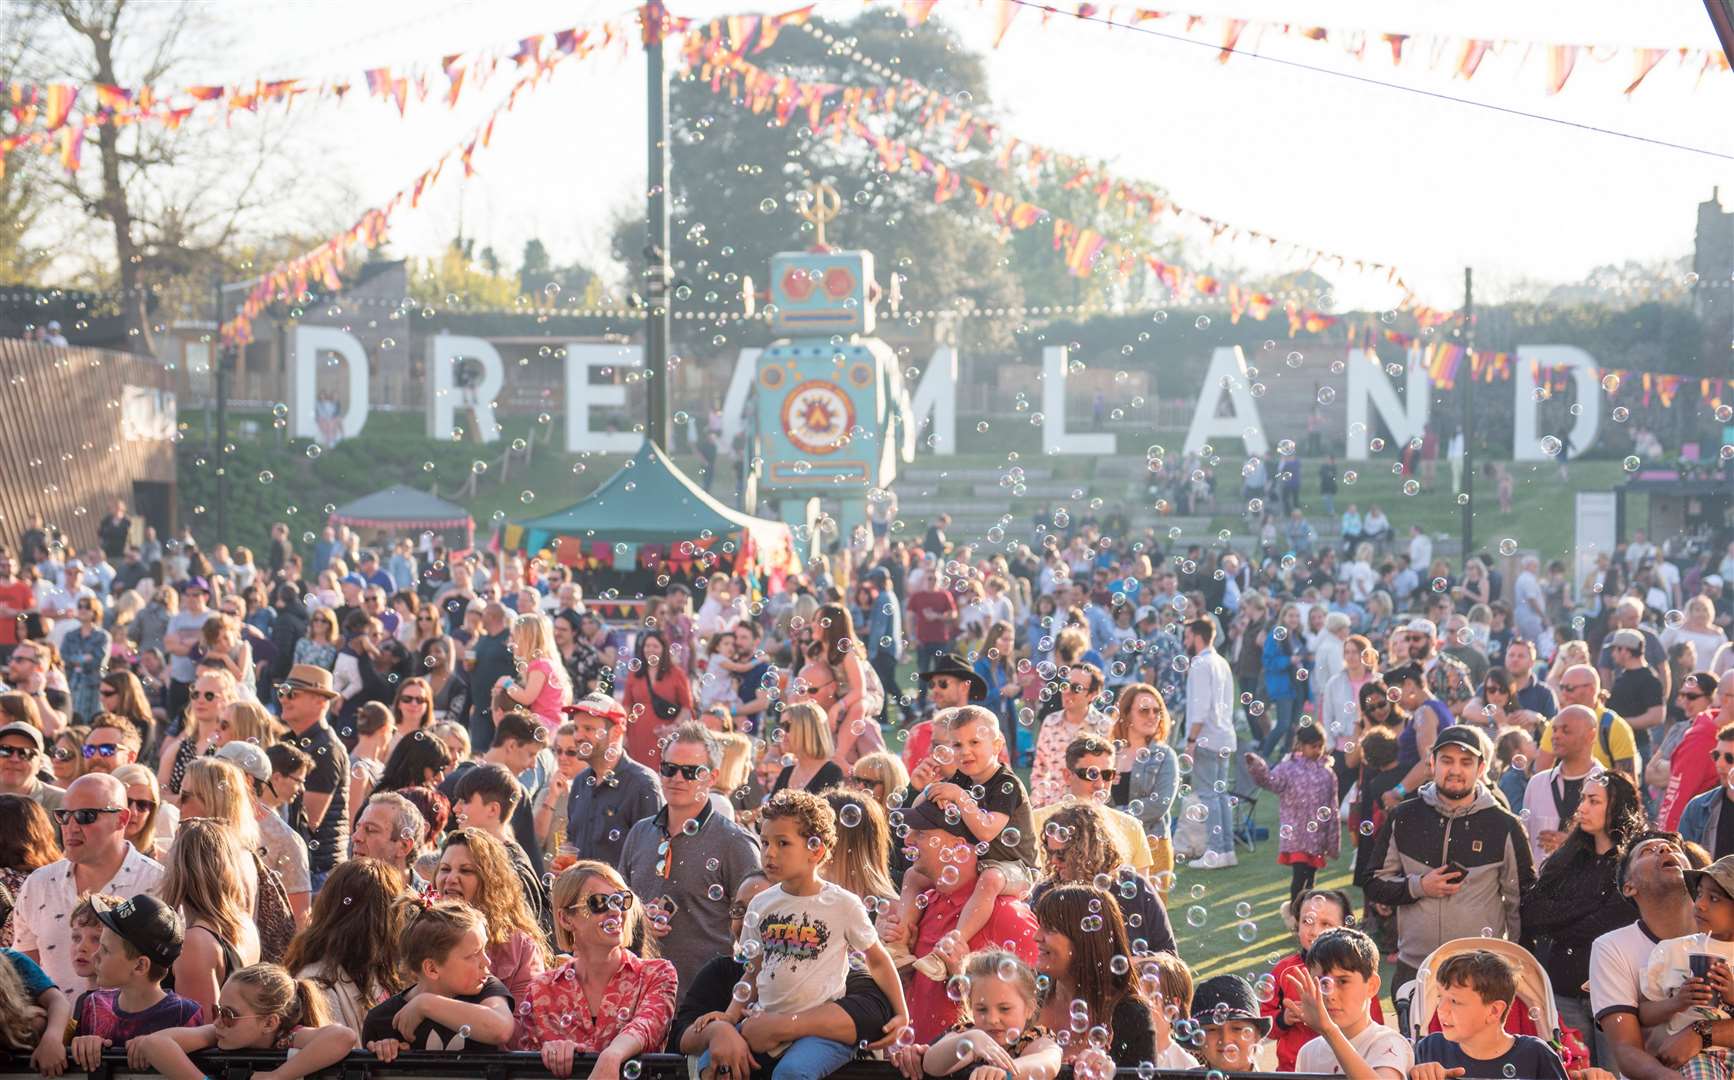 Head to the Scenic Stage at Dreamland